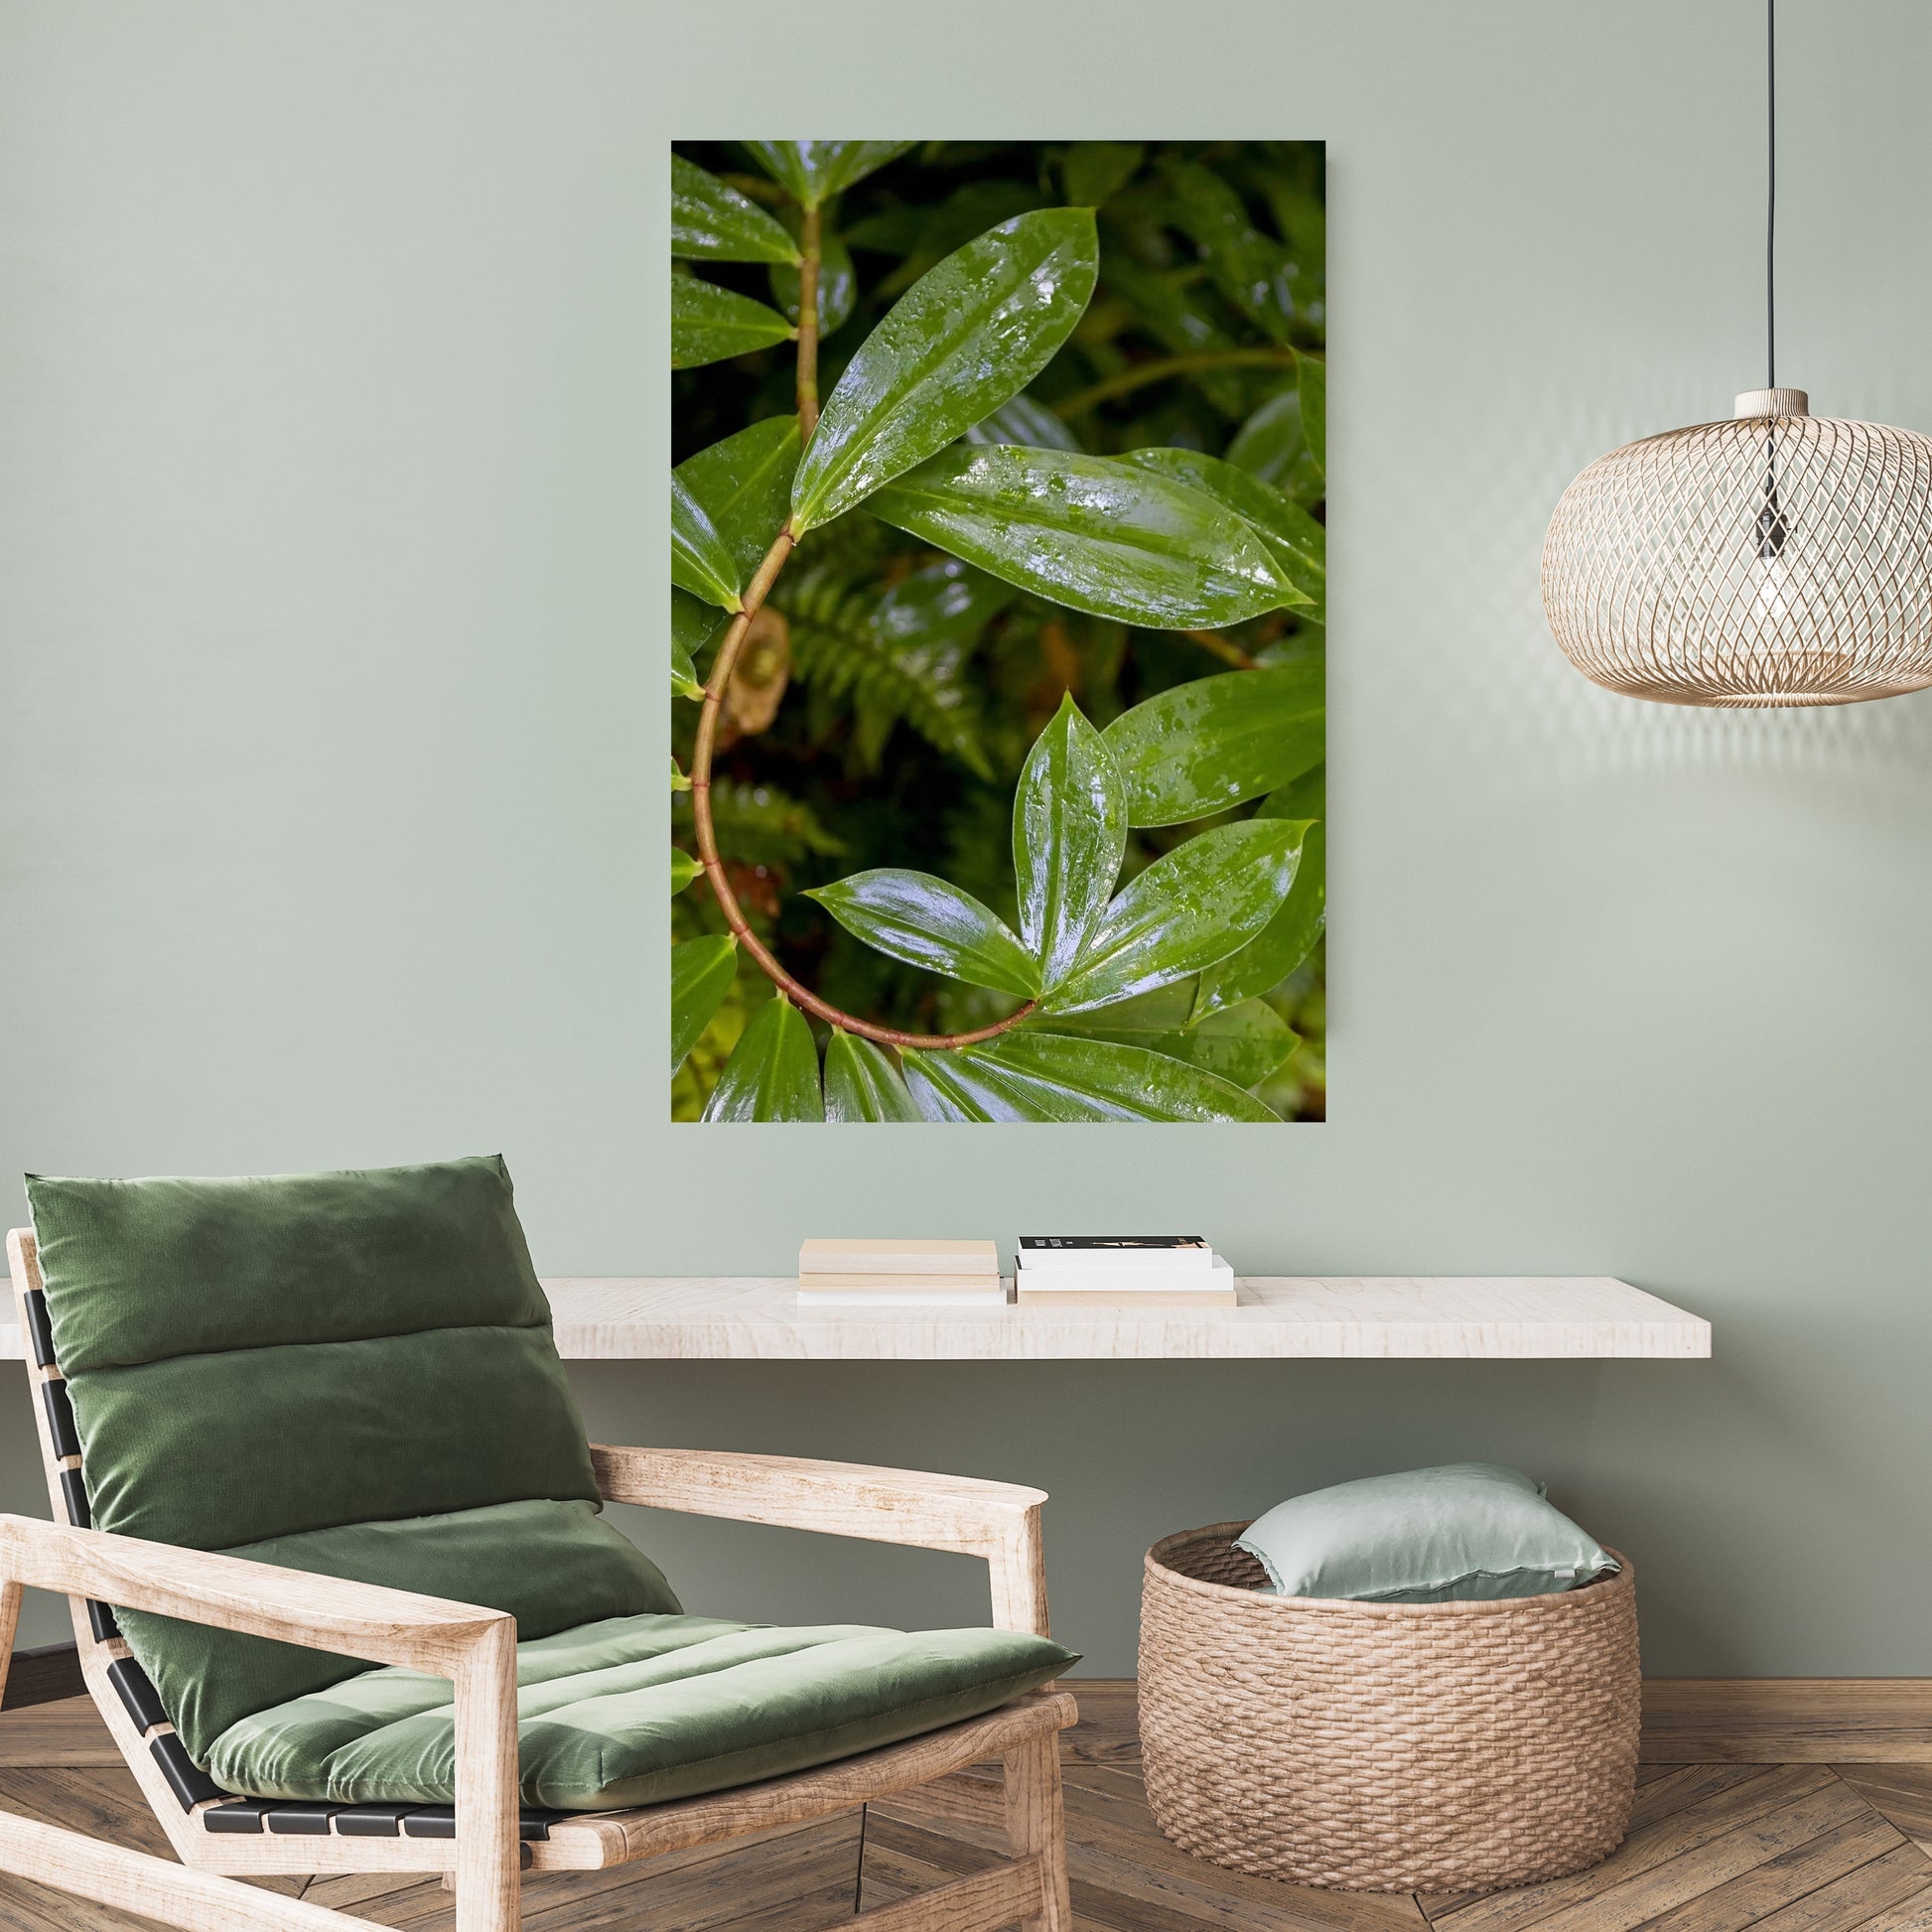 spiral ginger curvy plant art hanging in neutral mint green room